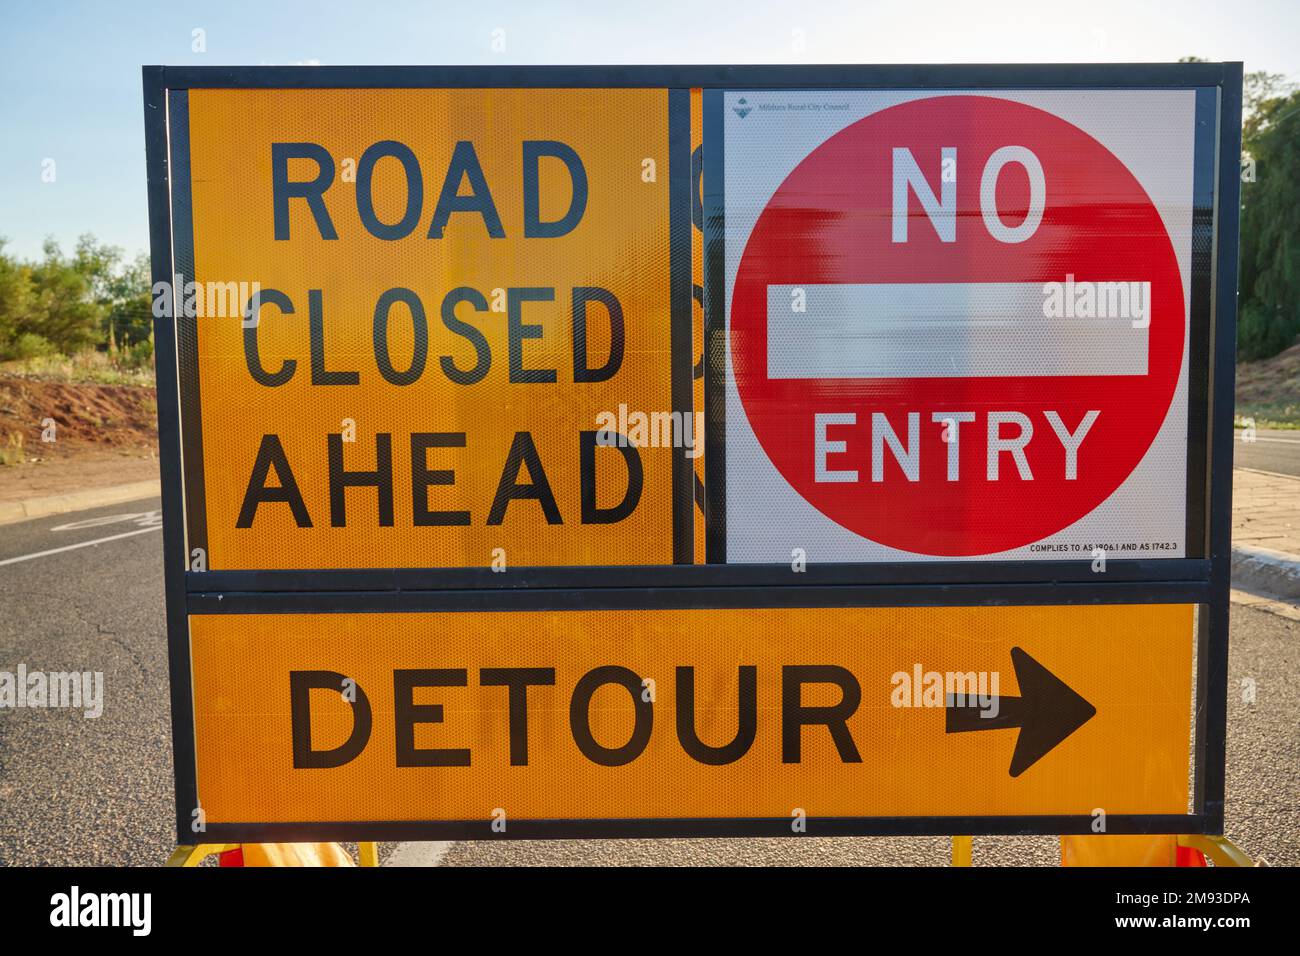 Road Closed, No Entry and Detour signs on Ranfurly Way, Merbein, Victoria, Australia. Stock Photo